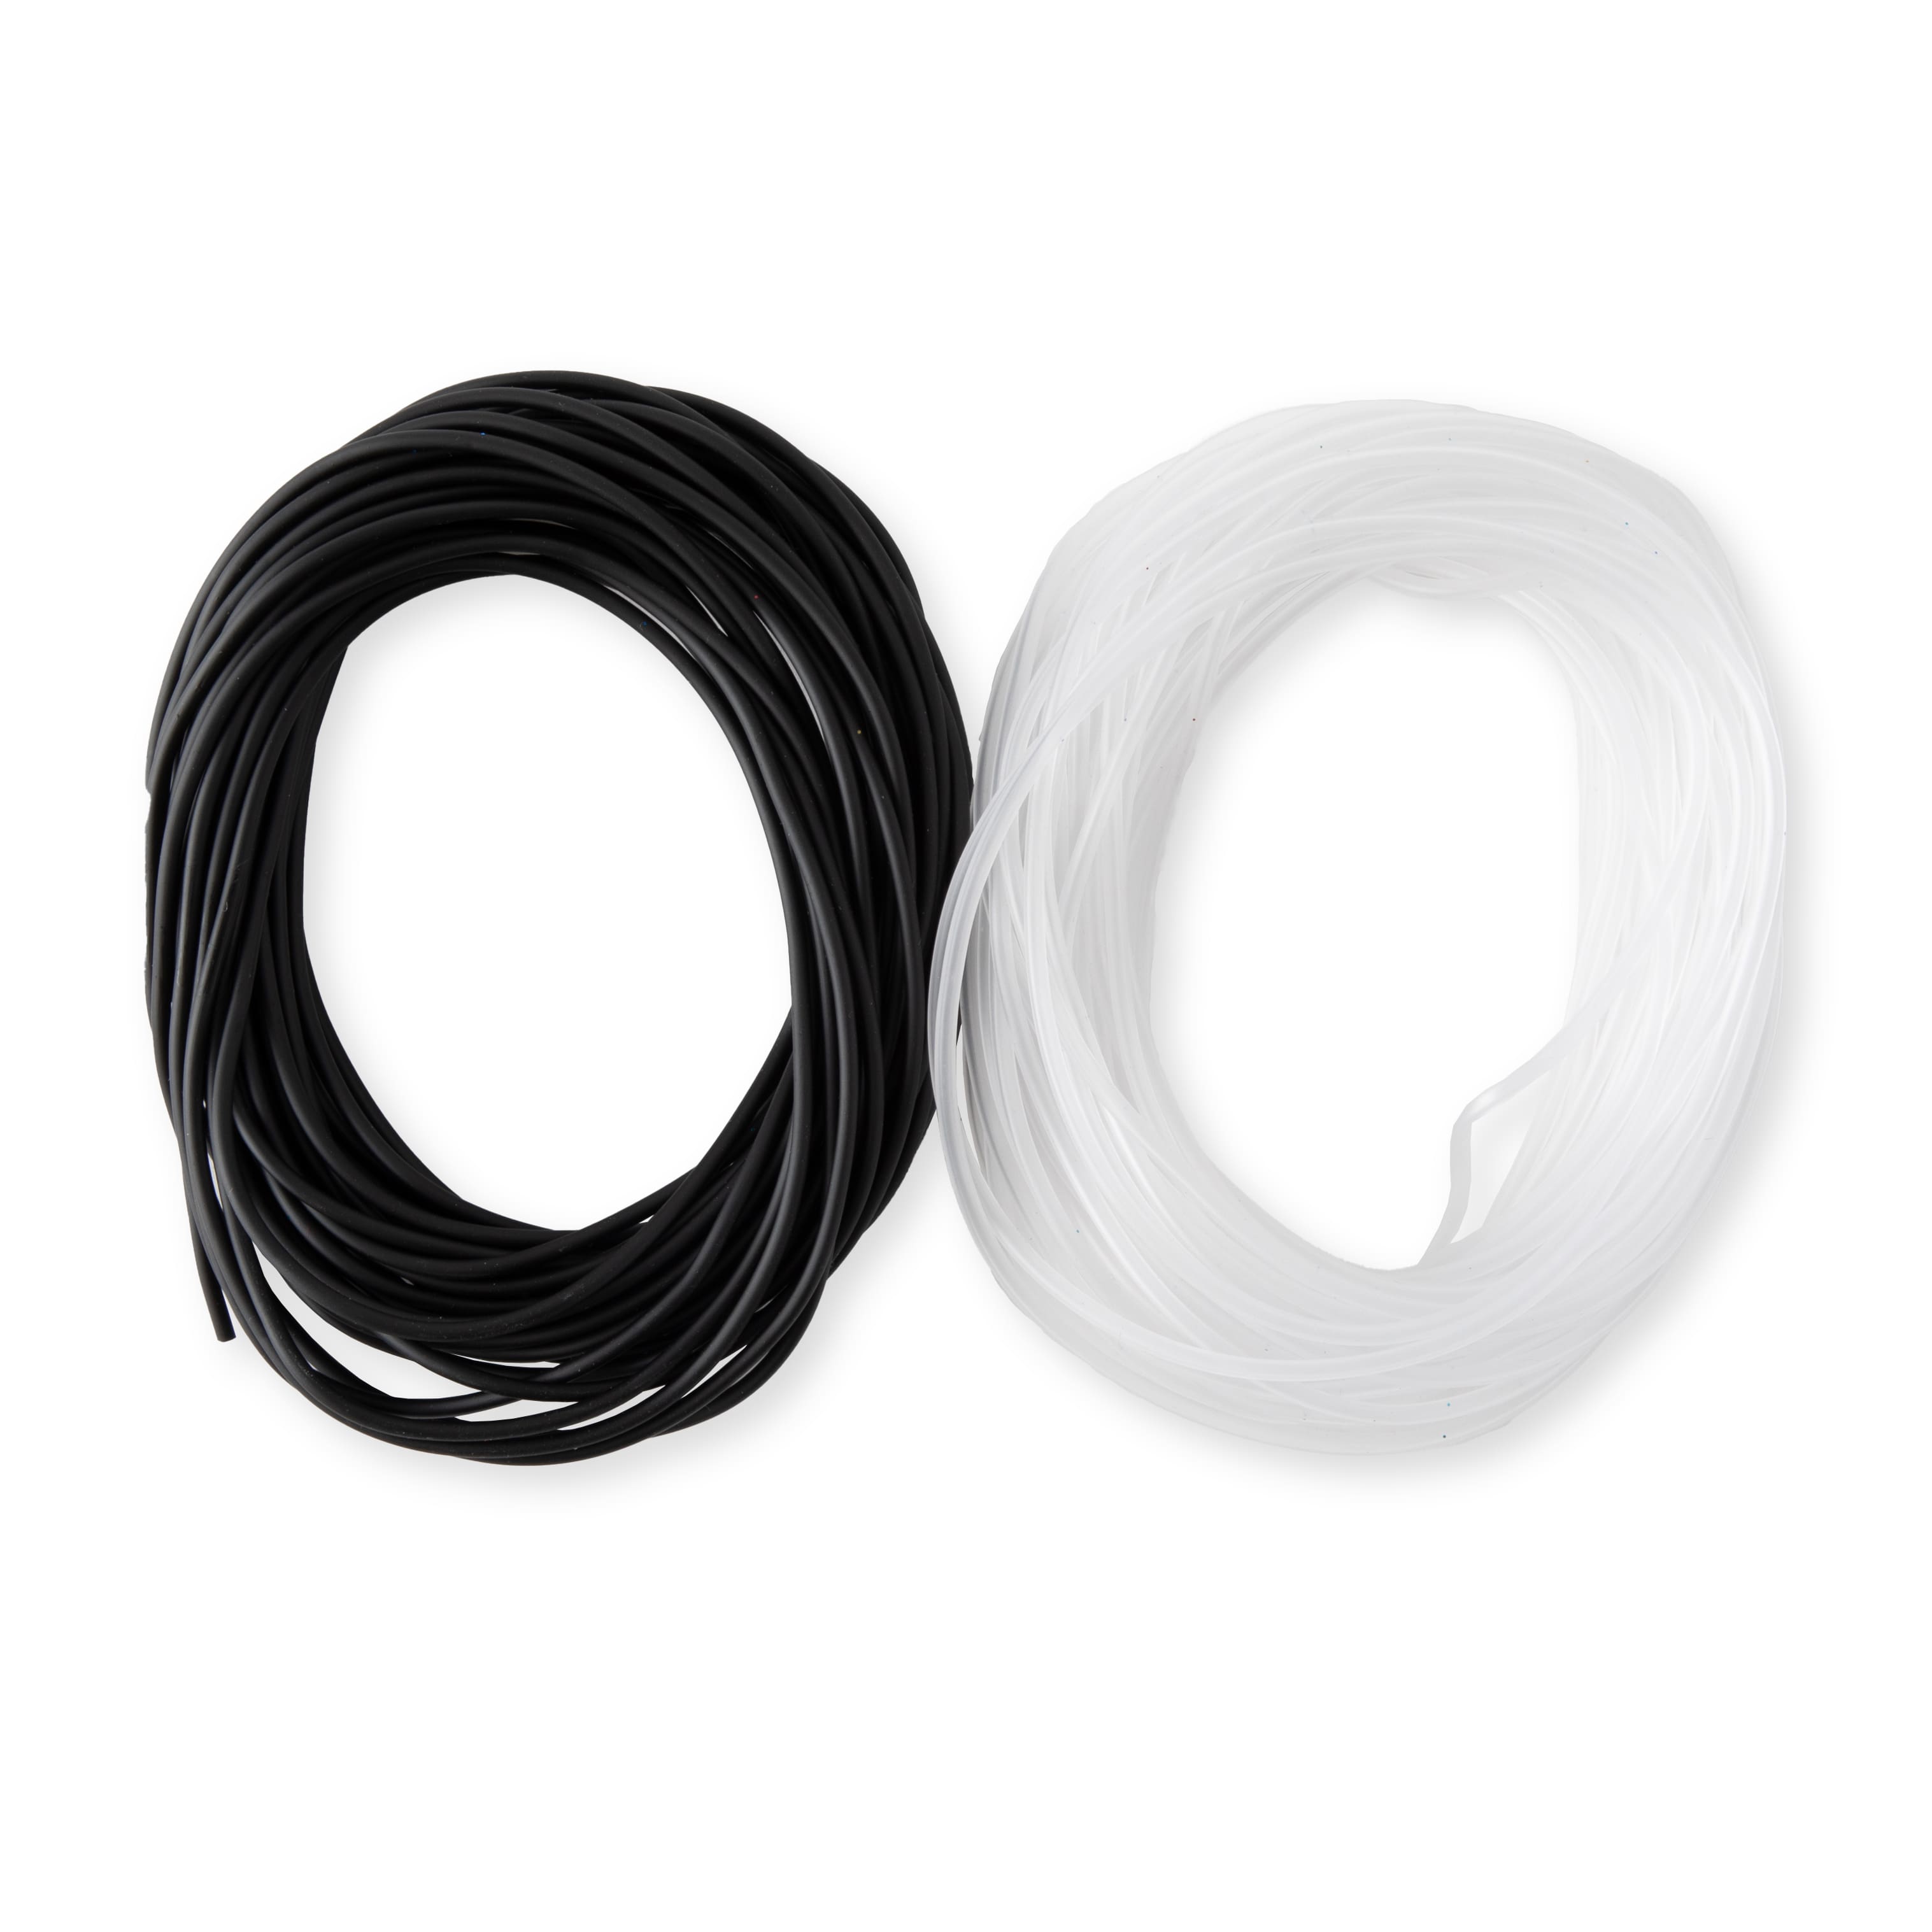 Creatology White Stretchy Cord - 50 ft